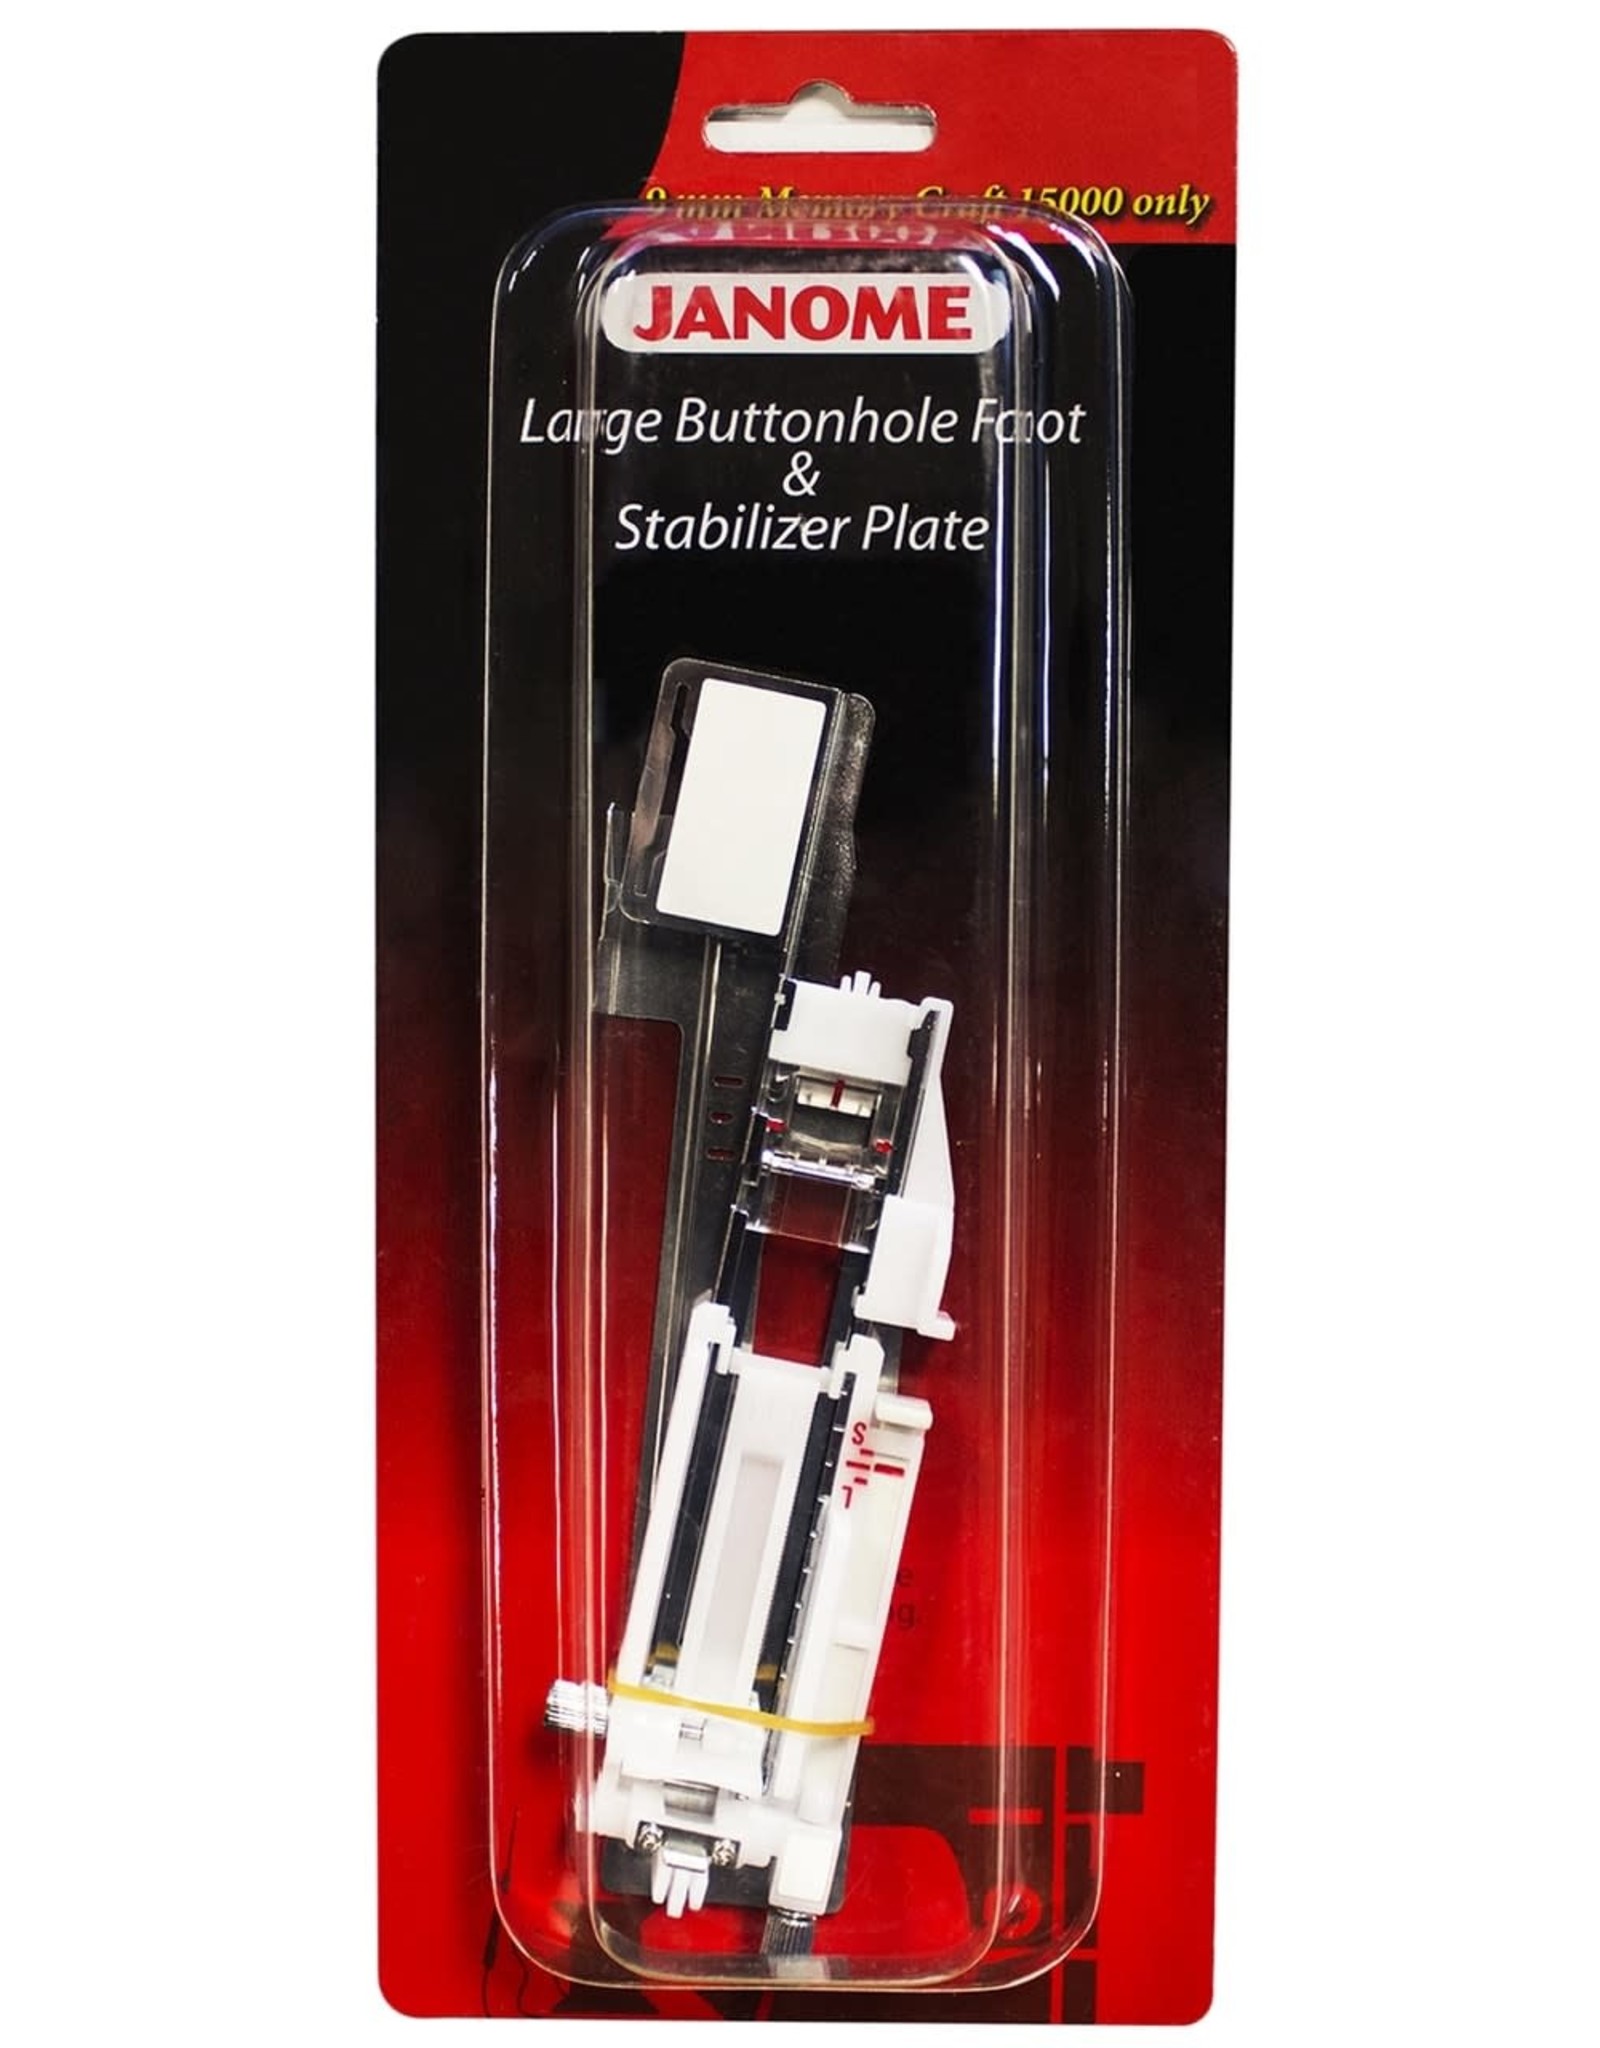 Janome Large Buttonhole Ft & Stb plate 9mm- 202199009